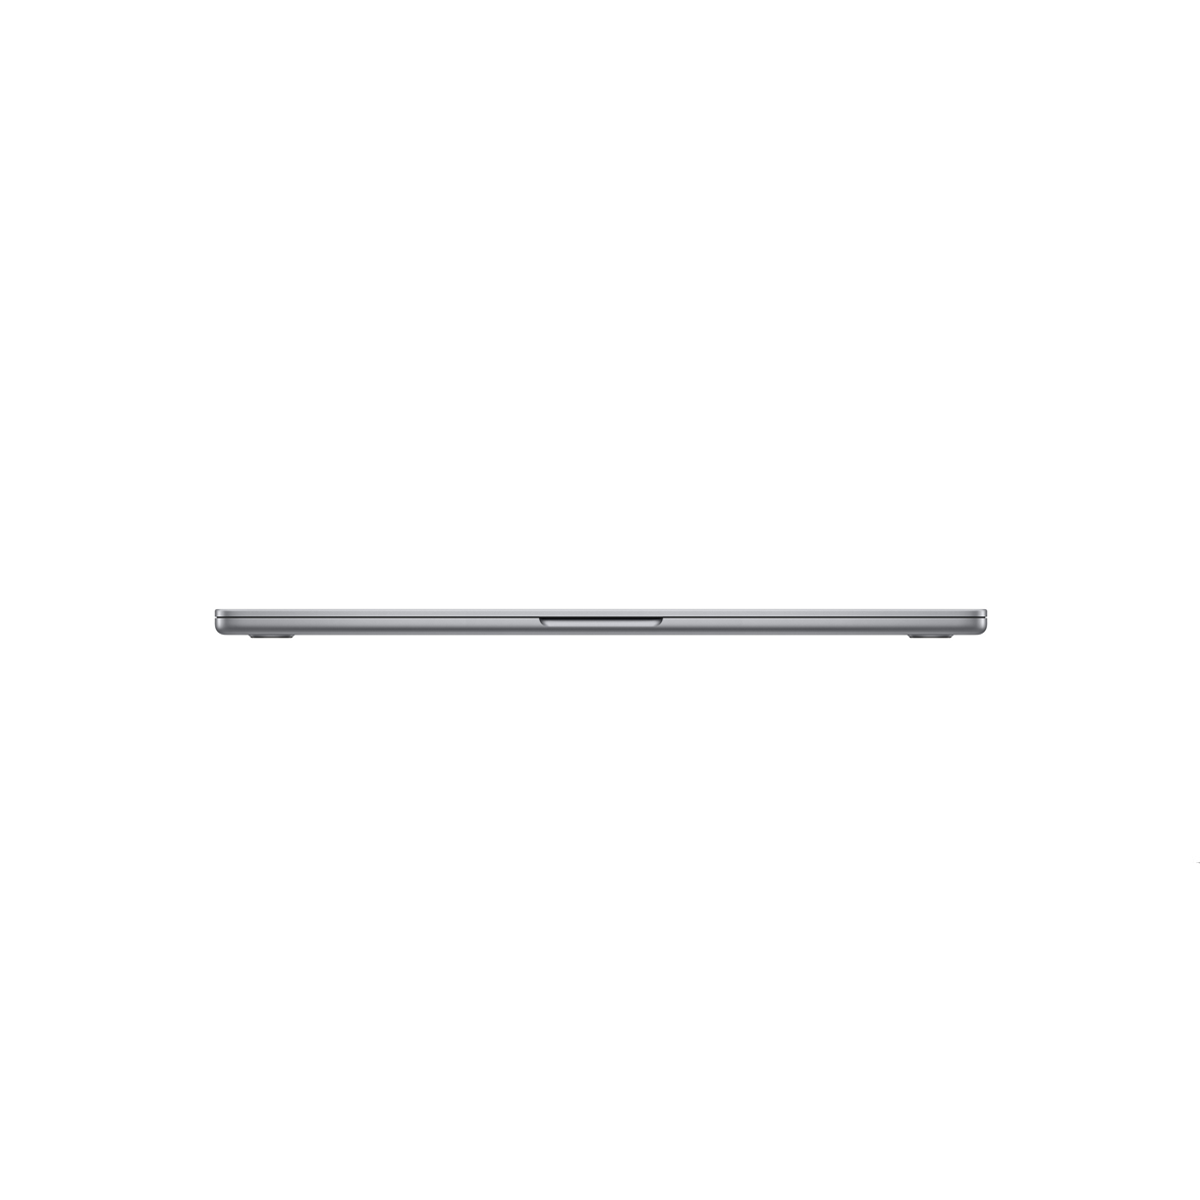 15-inch MacBook Air with M2 Chip